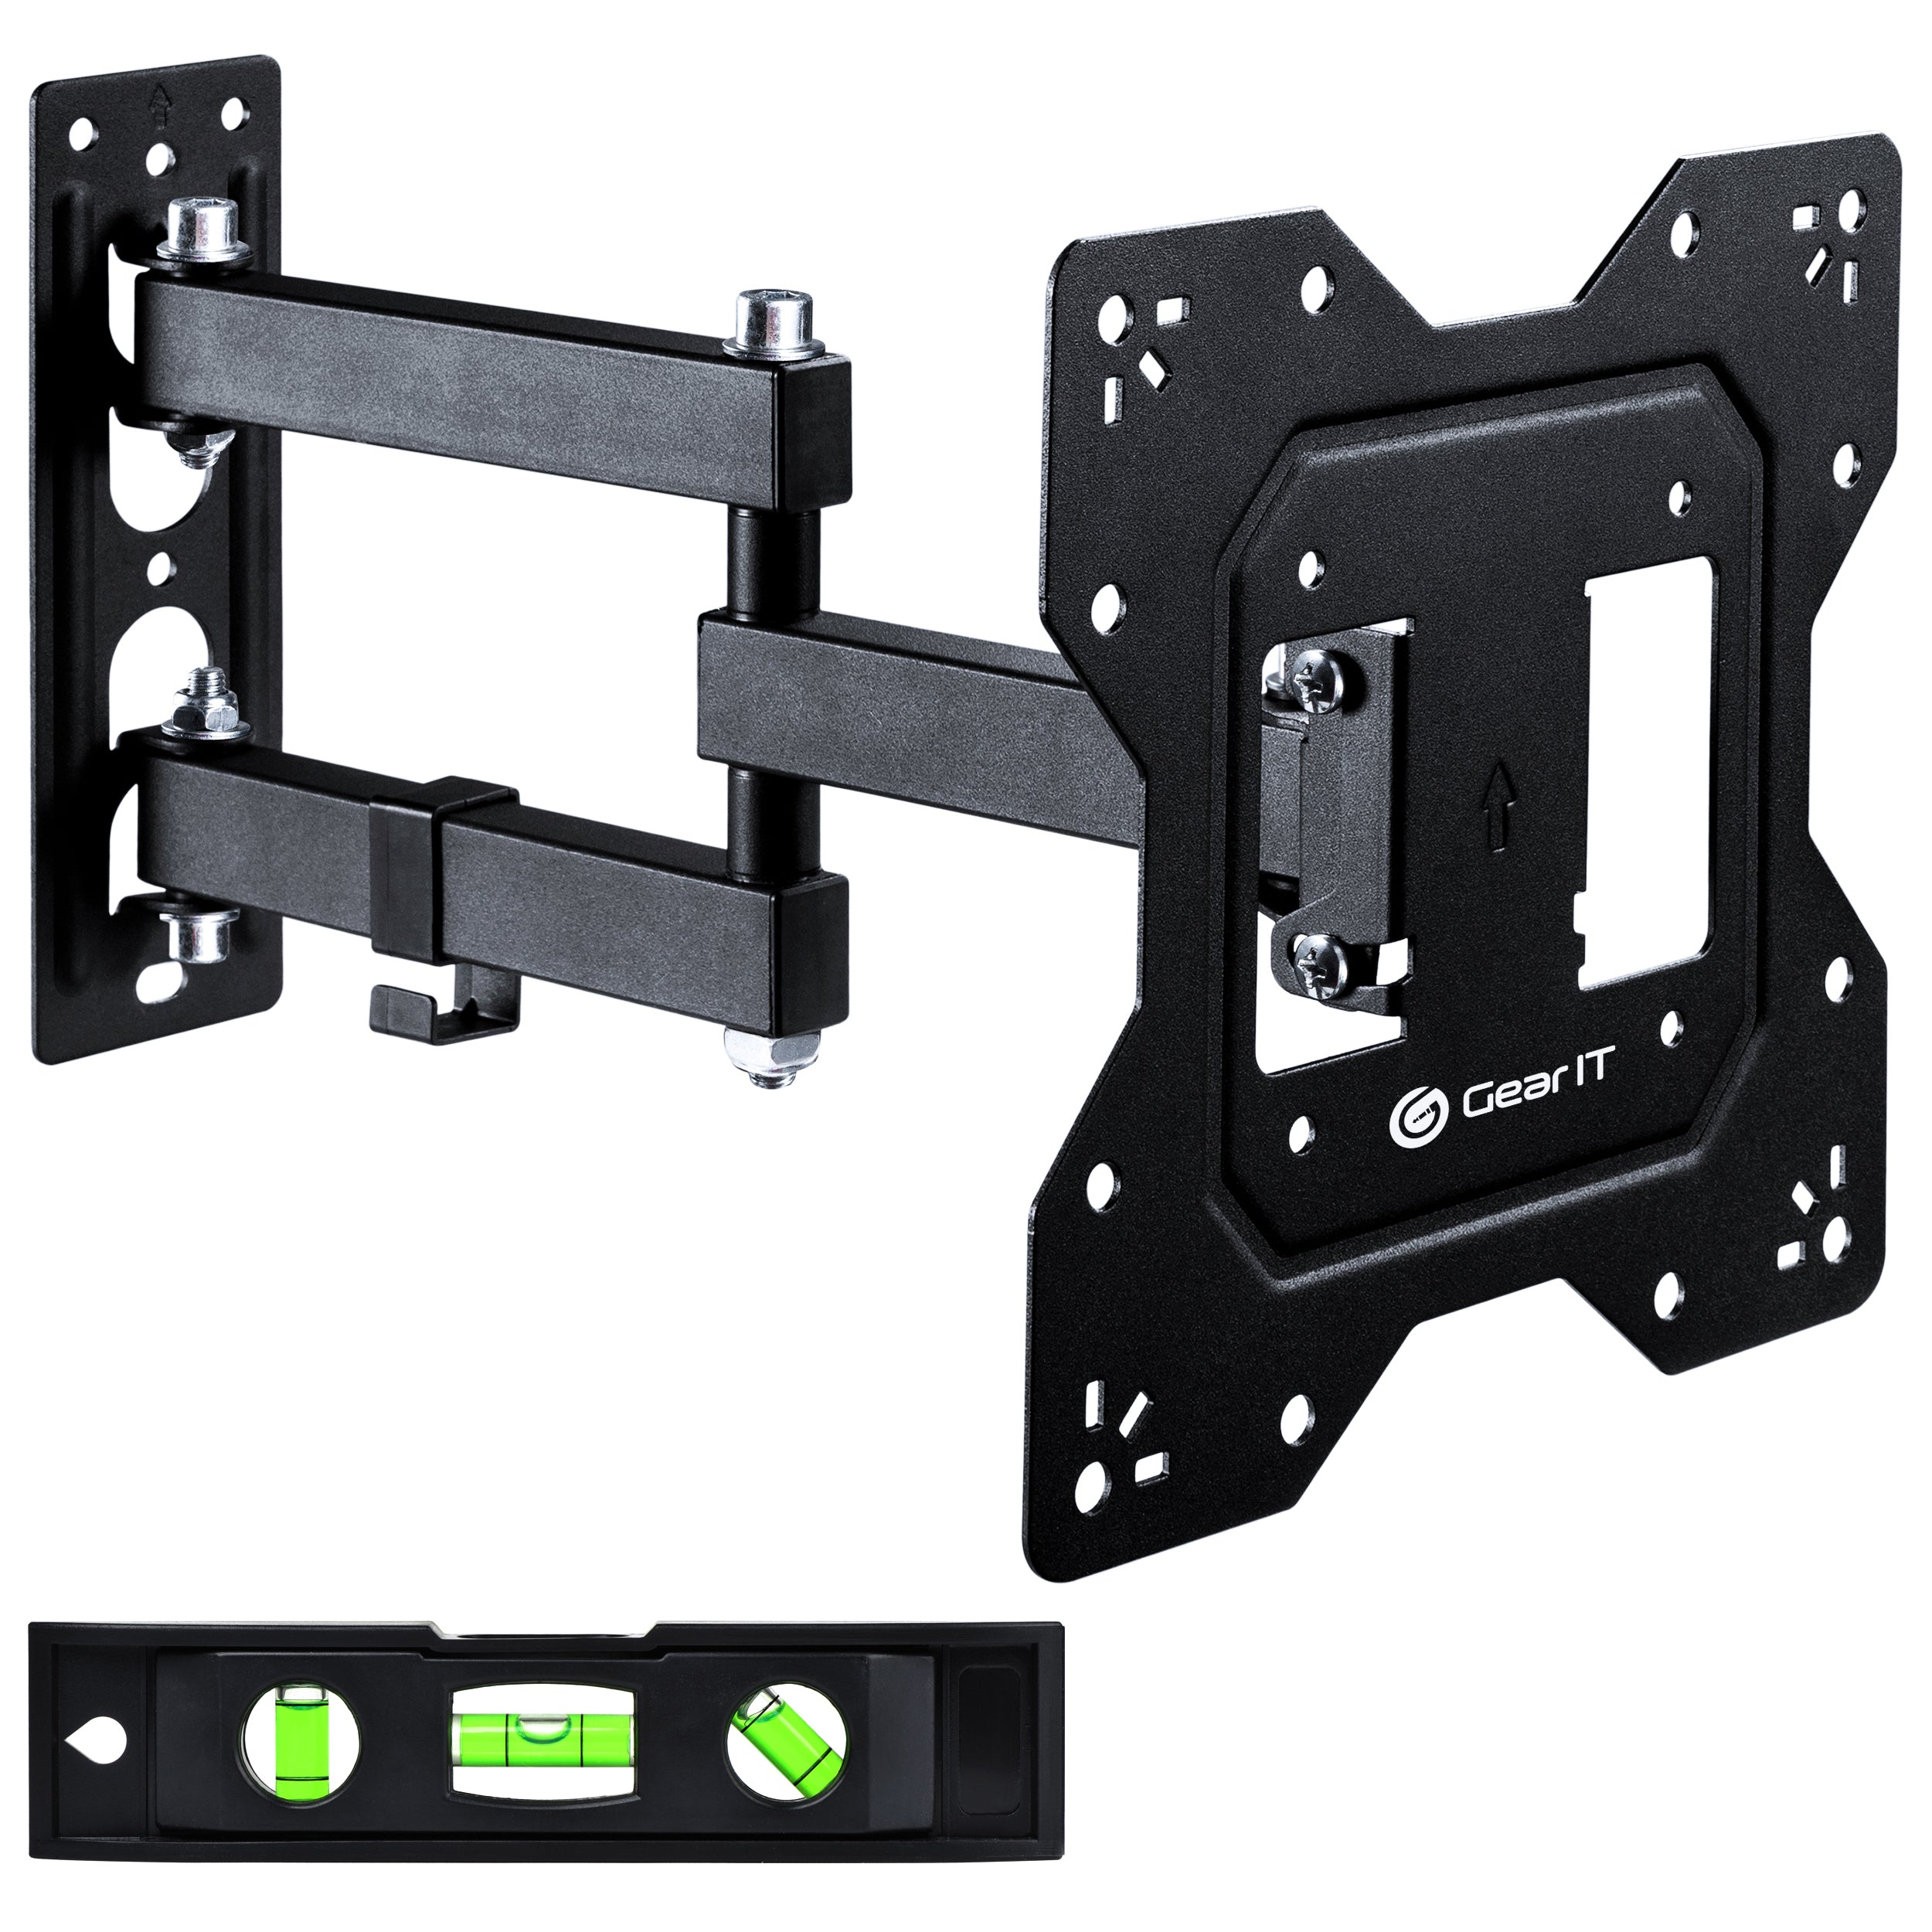 TV Wall Mount for 23-43inch TVs (Up to 66 lbs)